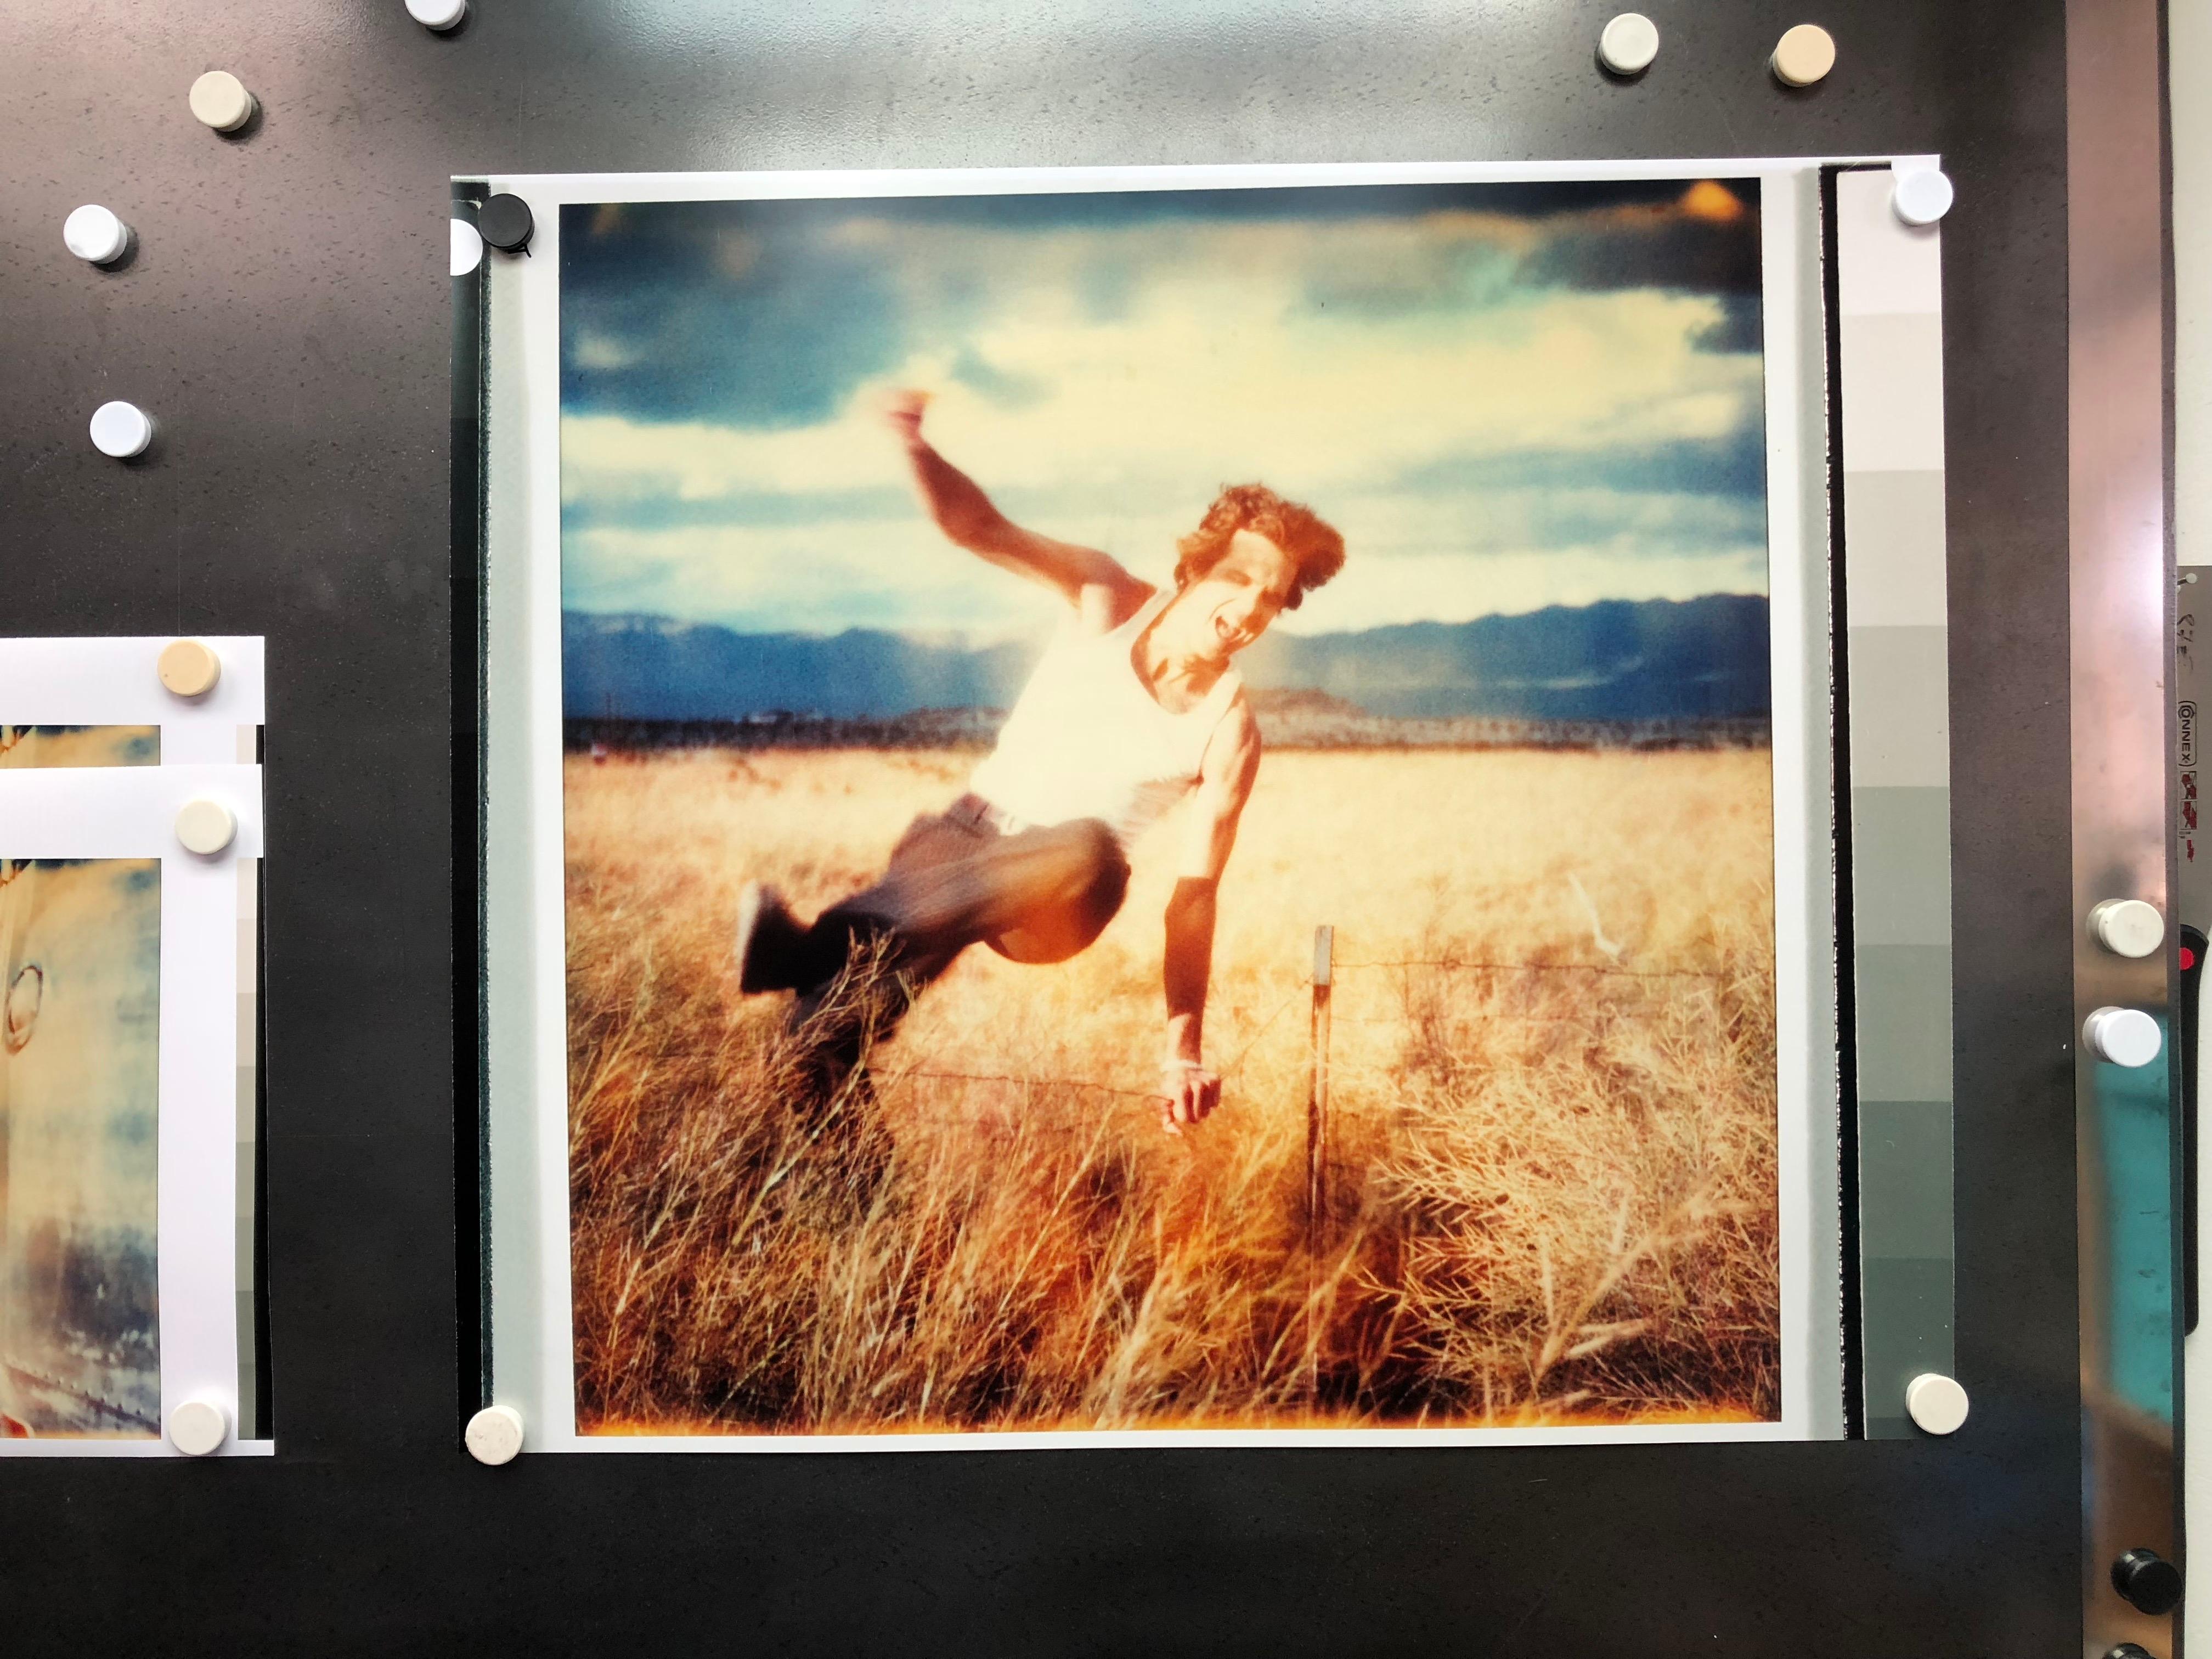 Field of Dreams (Sidewinder) - 2005

80 x 78 cm,
Edition 2/5, 
analog C-Print, hand-printed by the artist, based on a Polaroid, 
Artist Inventory 3131.02, 
Not mounted.

Stefanie Schneider's scintillating situations take place in the American West.